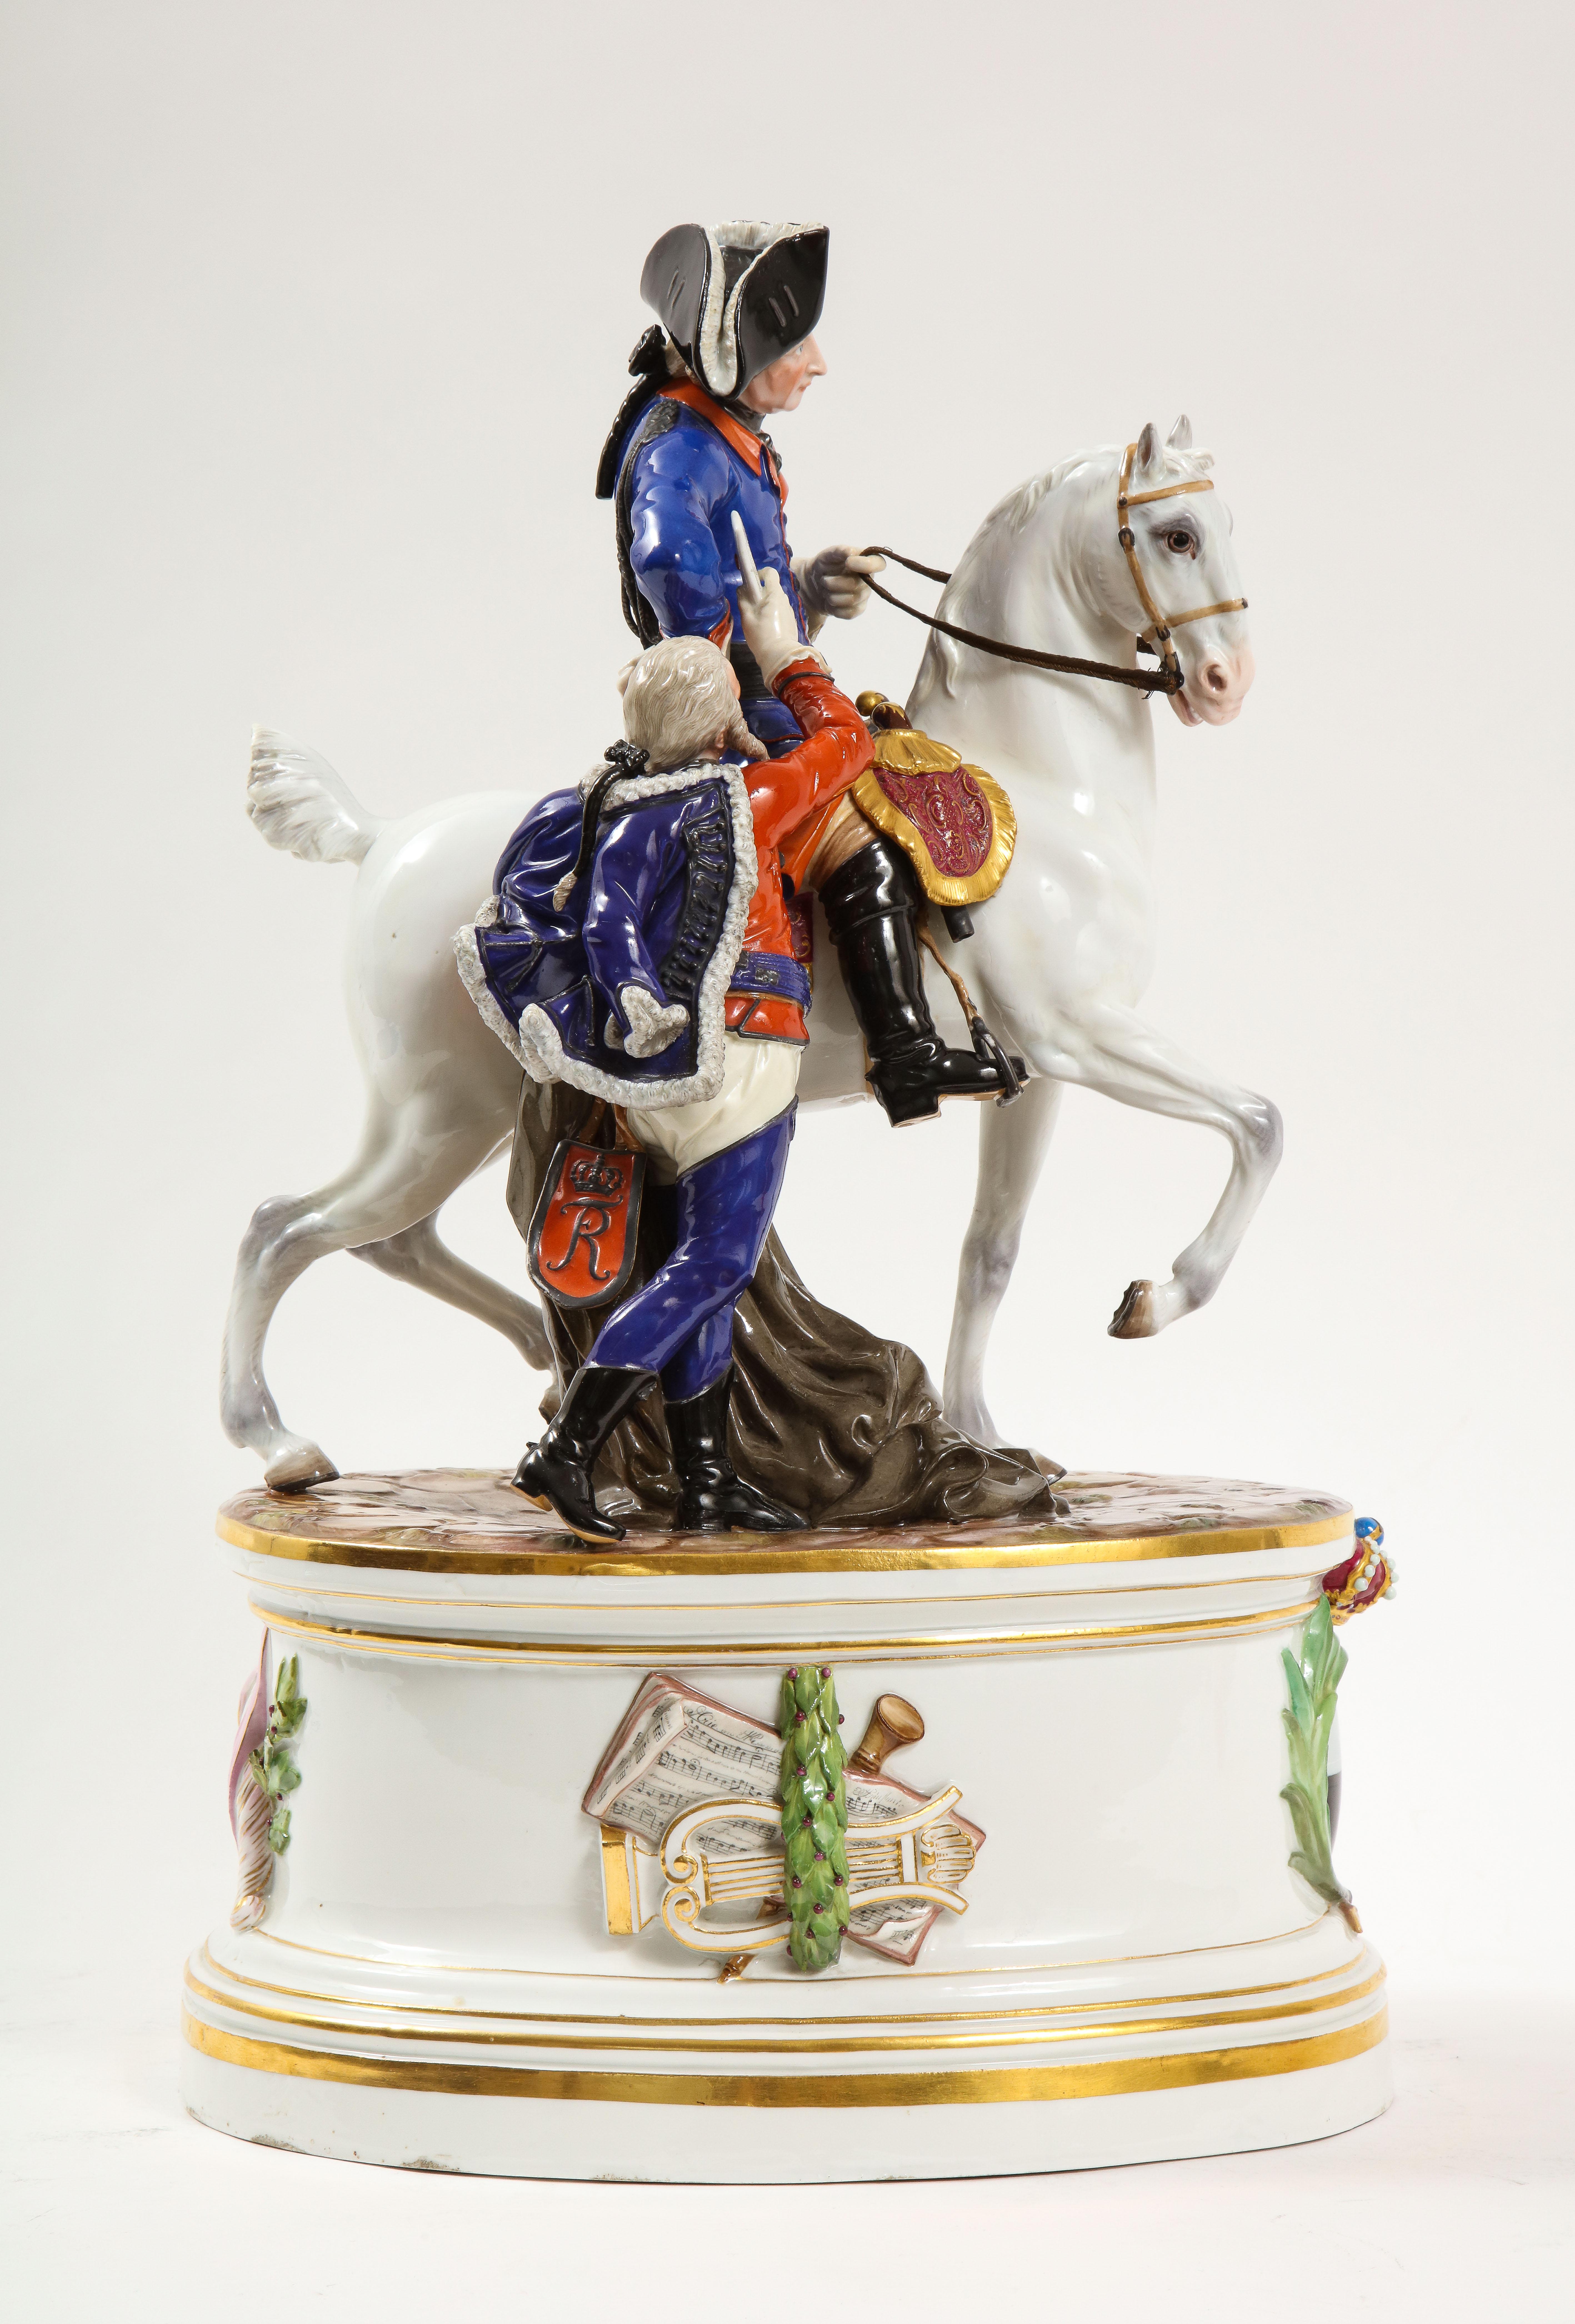 A Very Large 19th century Meissen porcelain Group of Russian Calvary General, believed to be Mikhail Kutuzov, the hero of Borodino, with aide de camp, marked with the Meissen underglaze blue crossed swords, and incised and impressed with numbers.